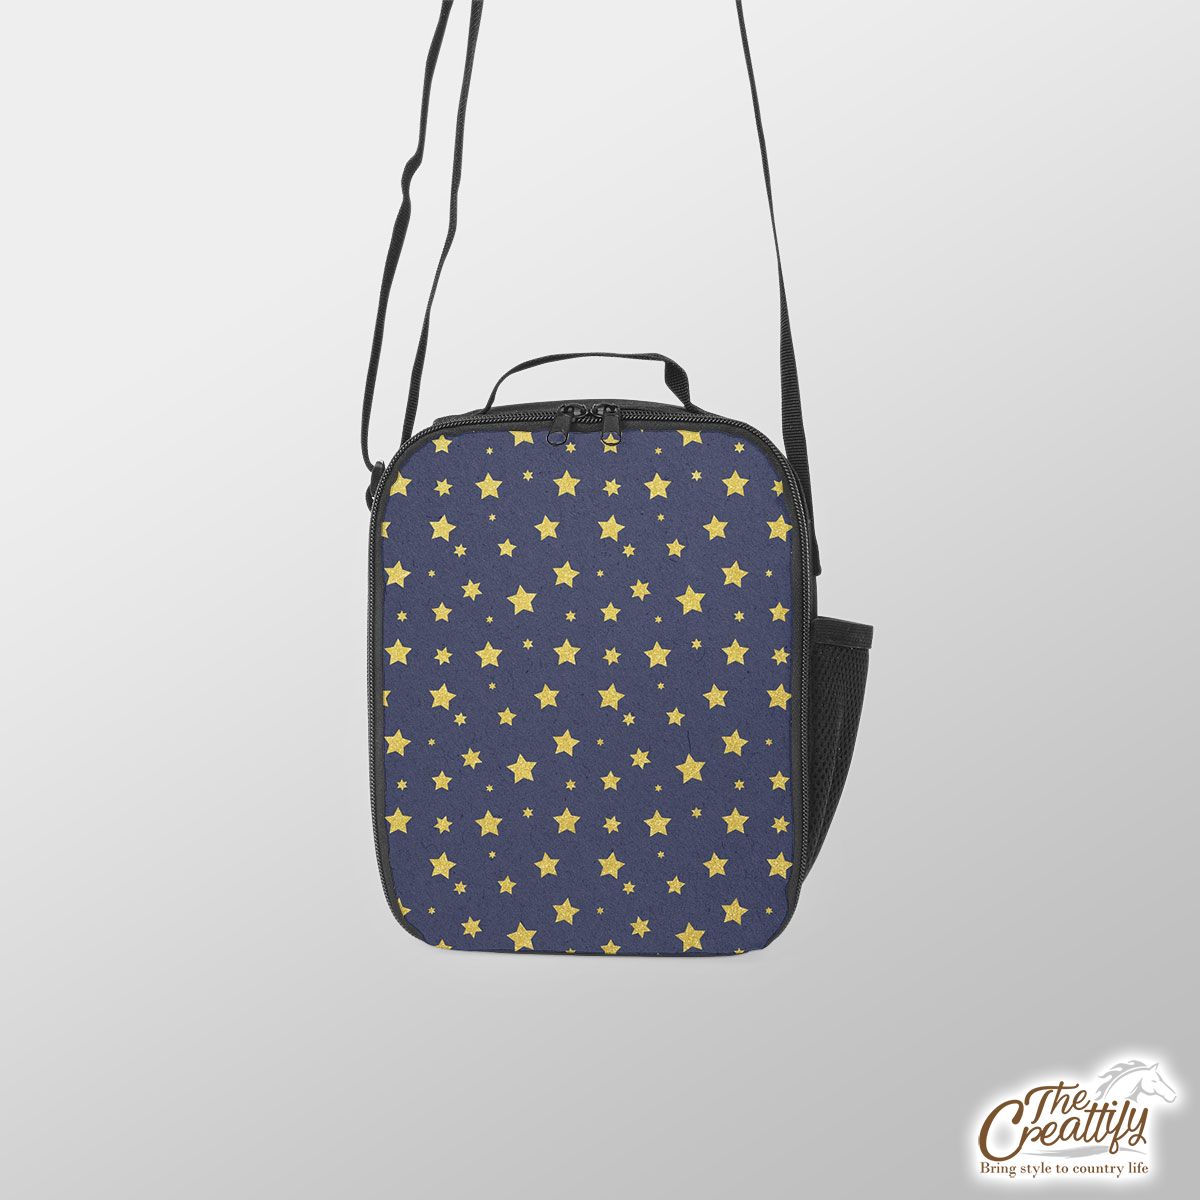 Star Sparkling Golden For Night Christmas, Christmas Gift Ideas Lunch Box Bag